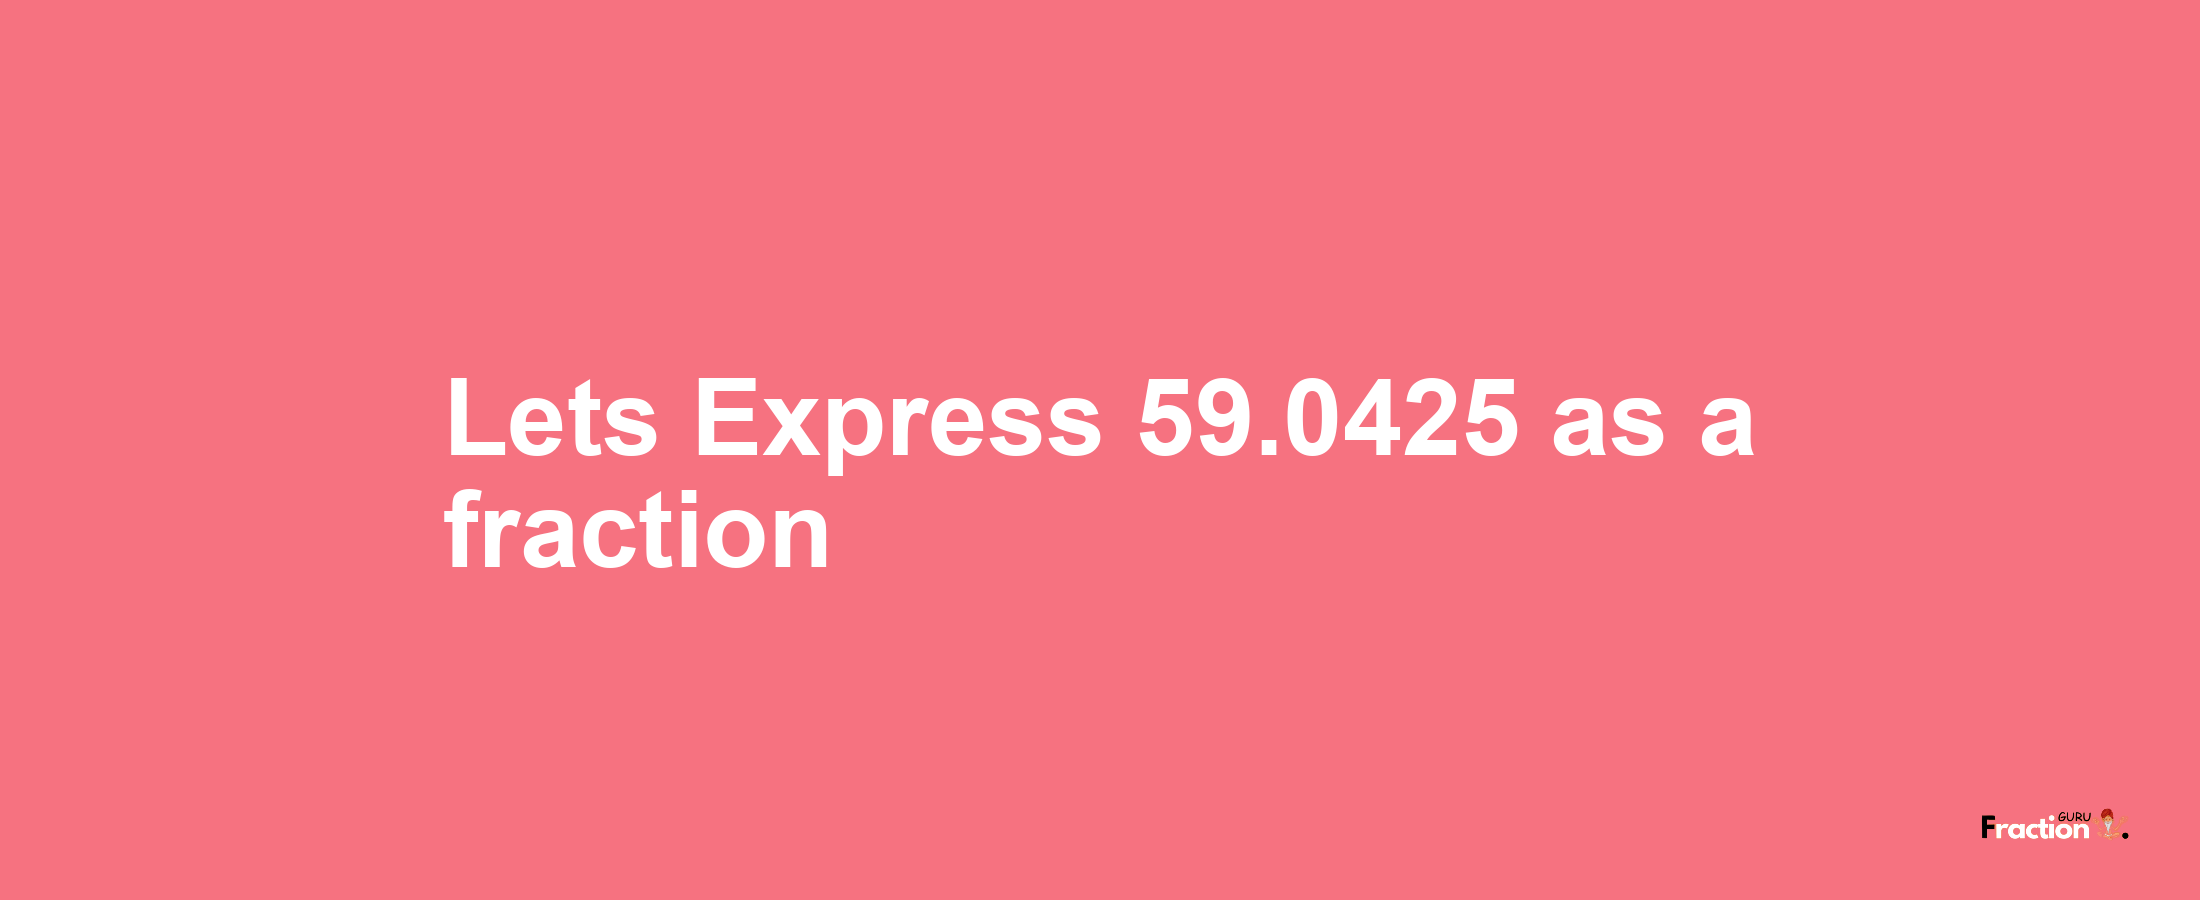 Lets Express 59.0425 as afraction